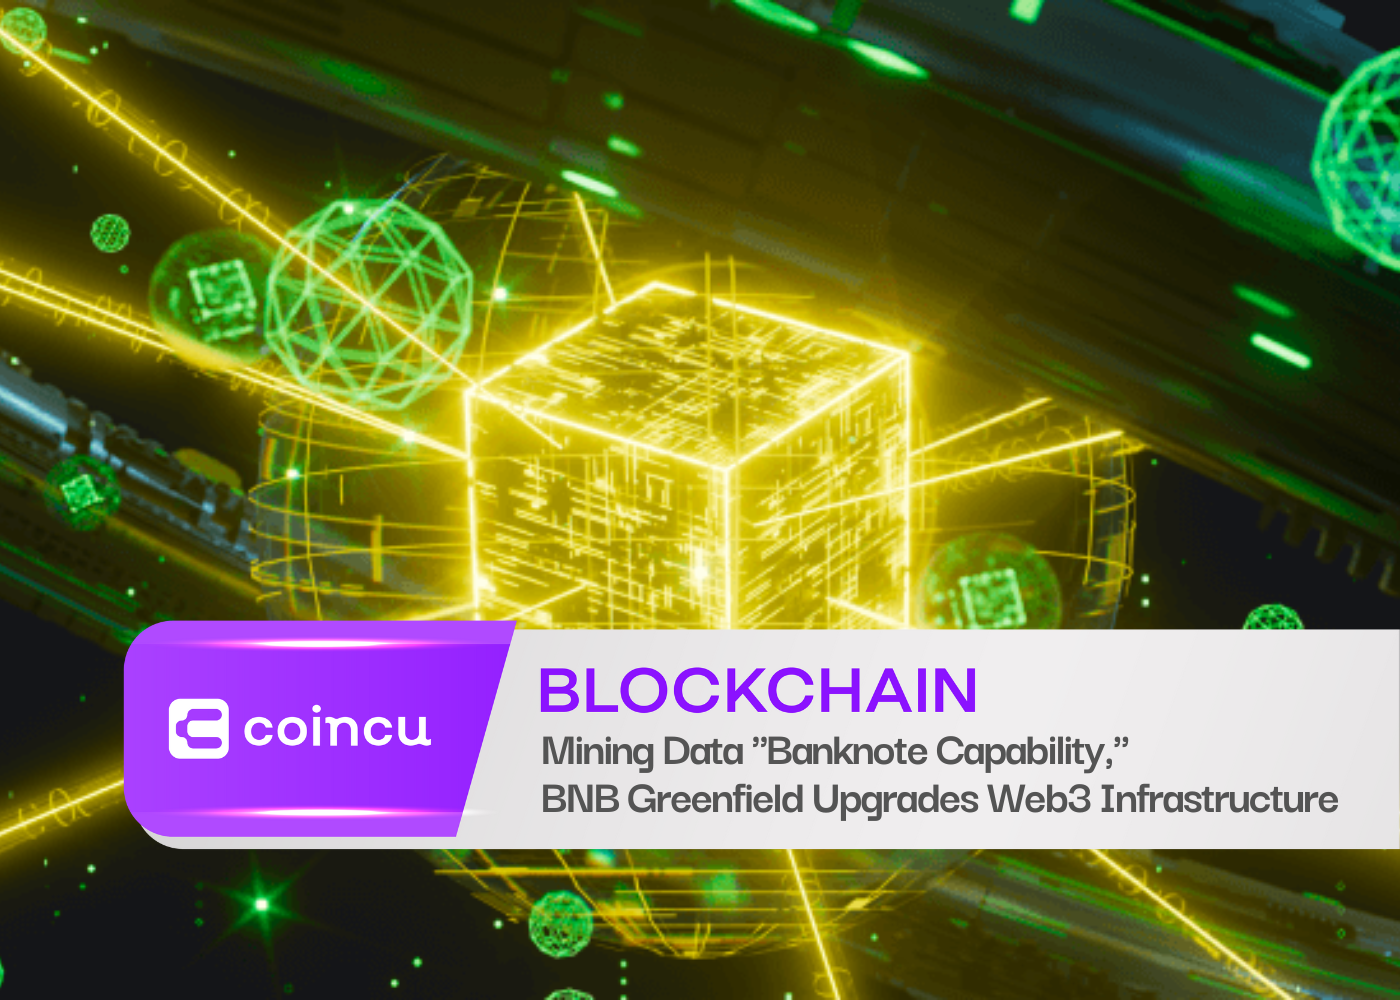 Mining Data "Banknote Capability," BNB Greenfield Upgrades Web3 Infrastructure